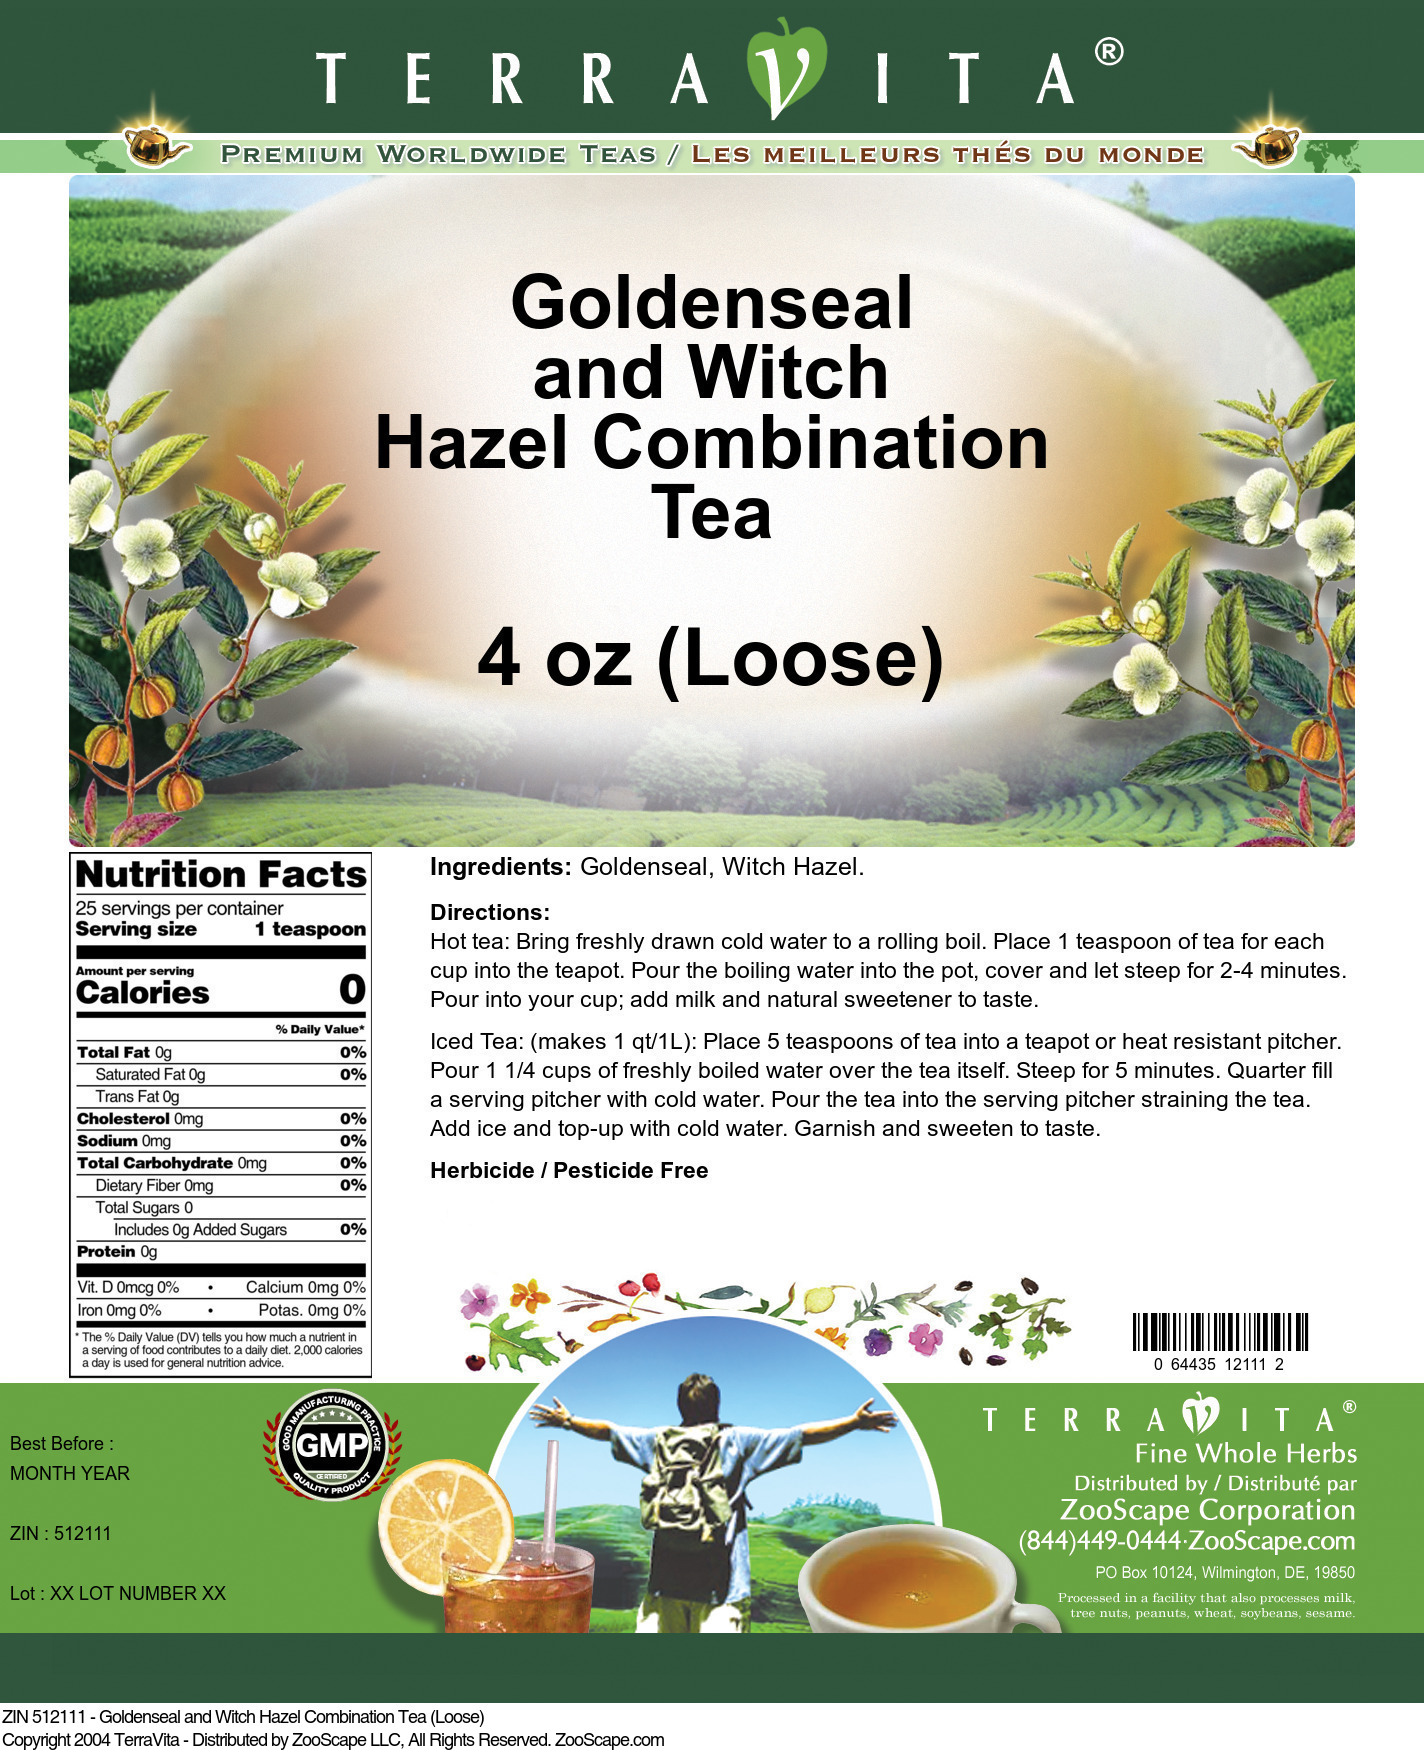 Goldenseal and Witch Hazel Combination Tea (Loose) - Label